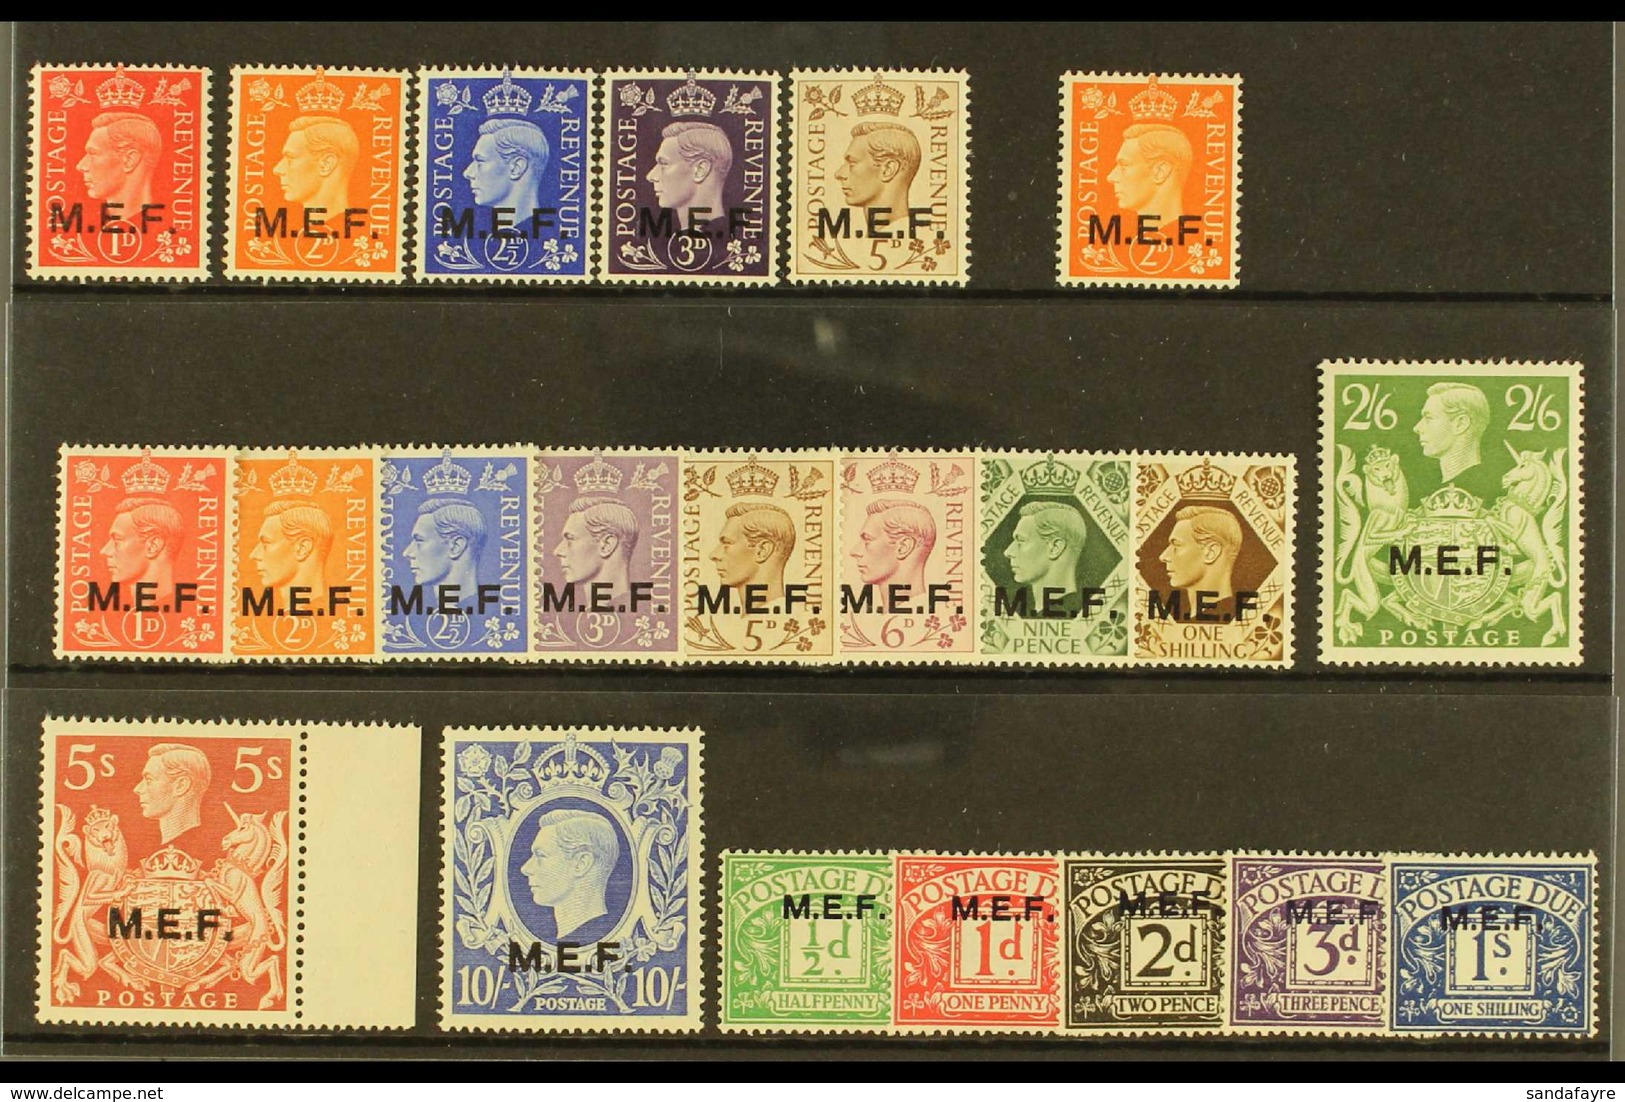 MIDDLE EAST FORCES 1942-47 FINE MINT COLLECTION On A Stock Card That Includes 1942 "Type I" Opt'd Set, "Type II" Opt'd 2 - Italienisch Ost-Afrika